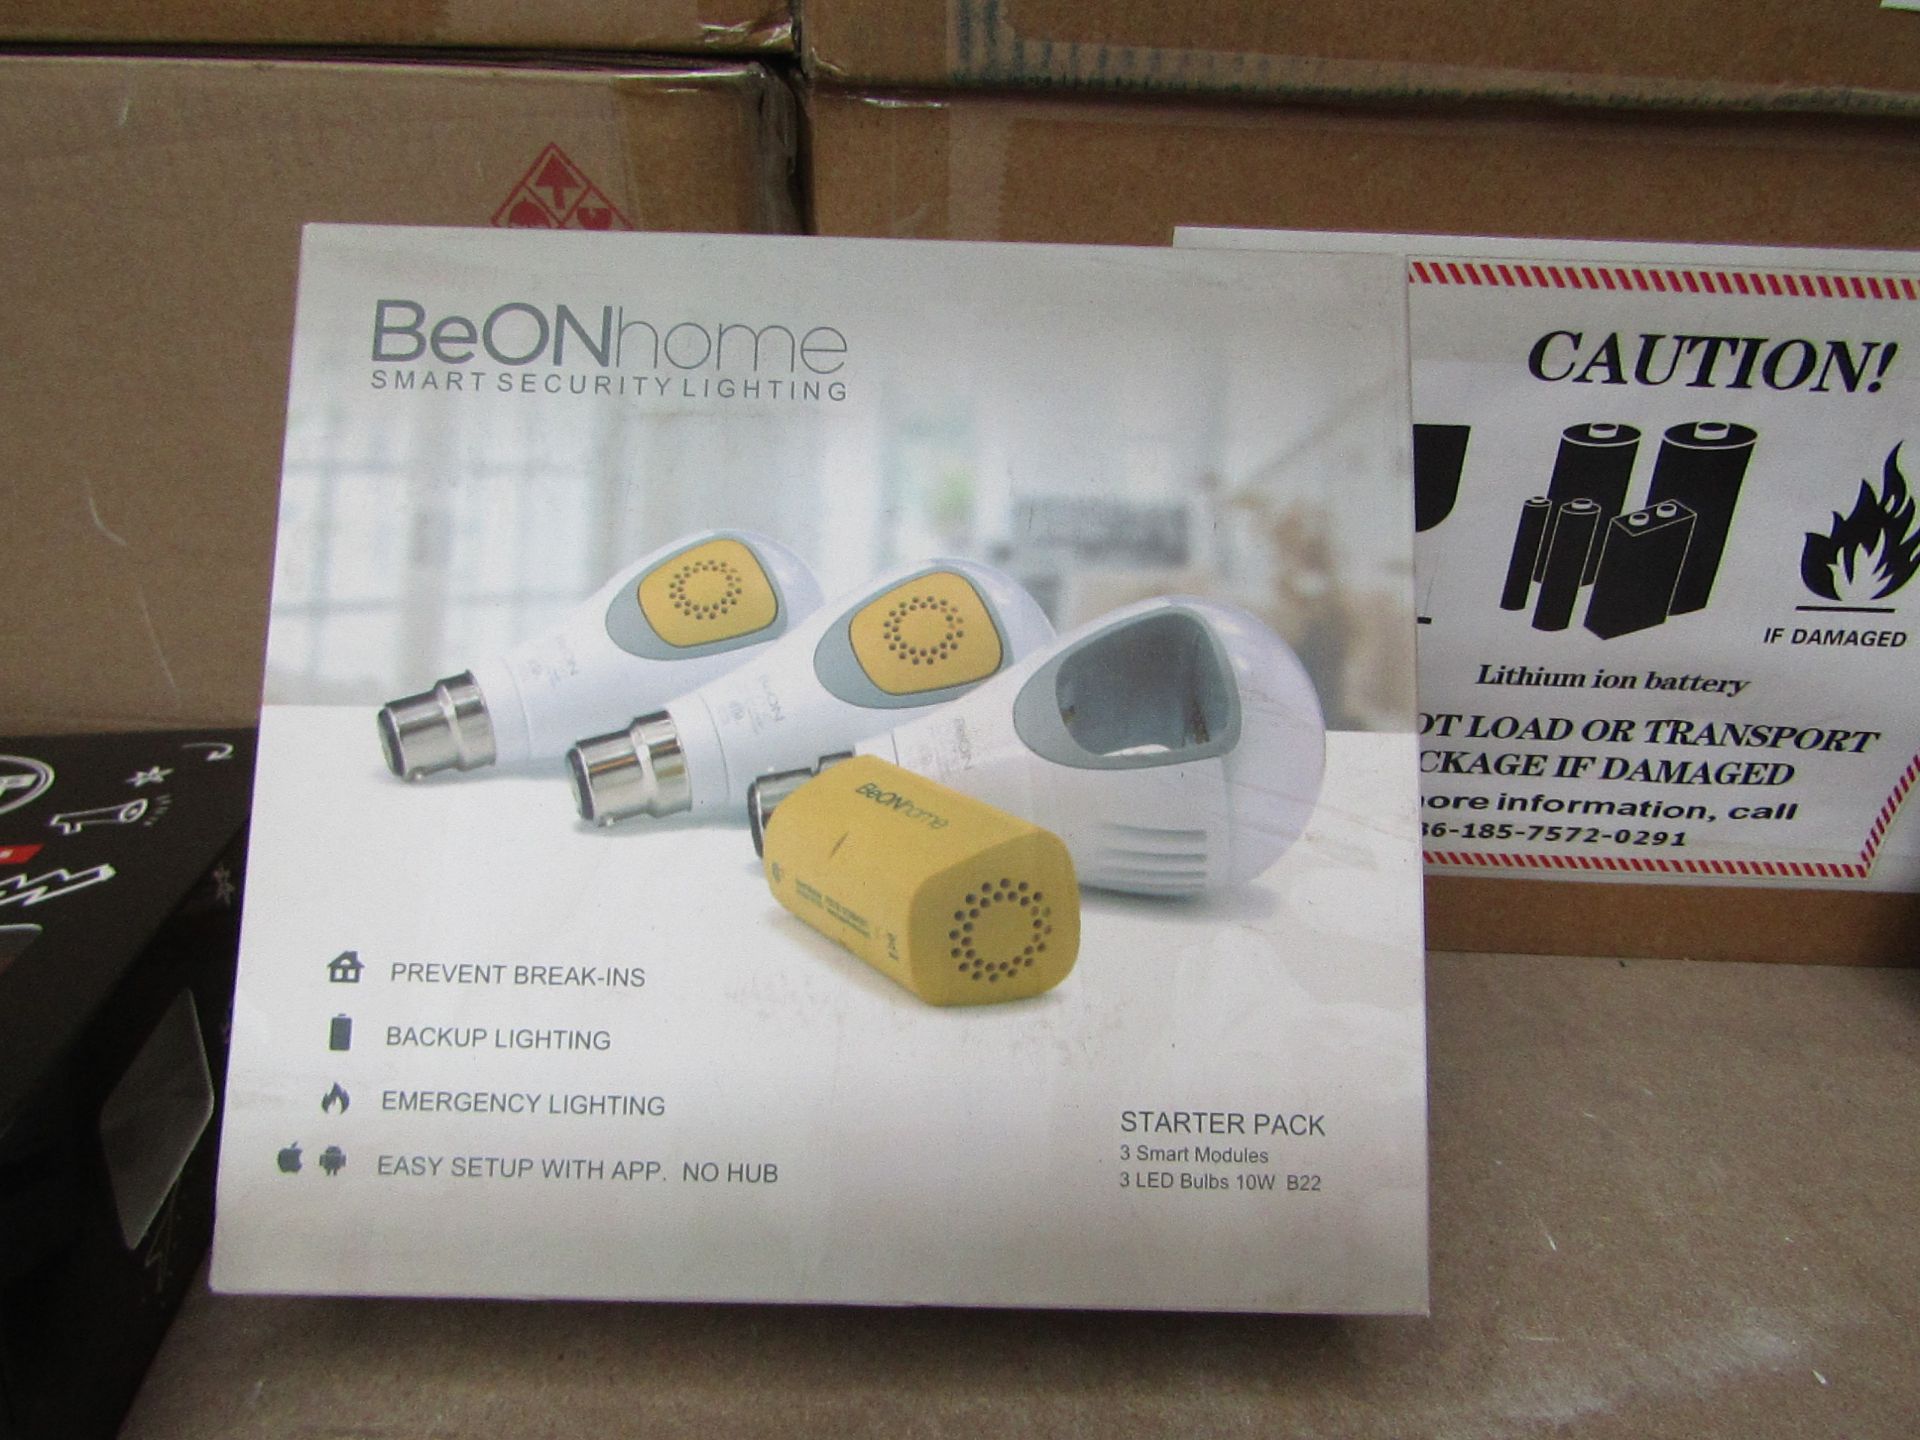 12x BeON Home smart light bulb starter pack includes 3 smart modules and 3 B22 LED bulbs, with a